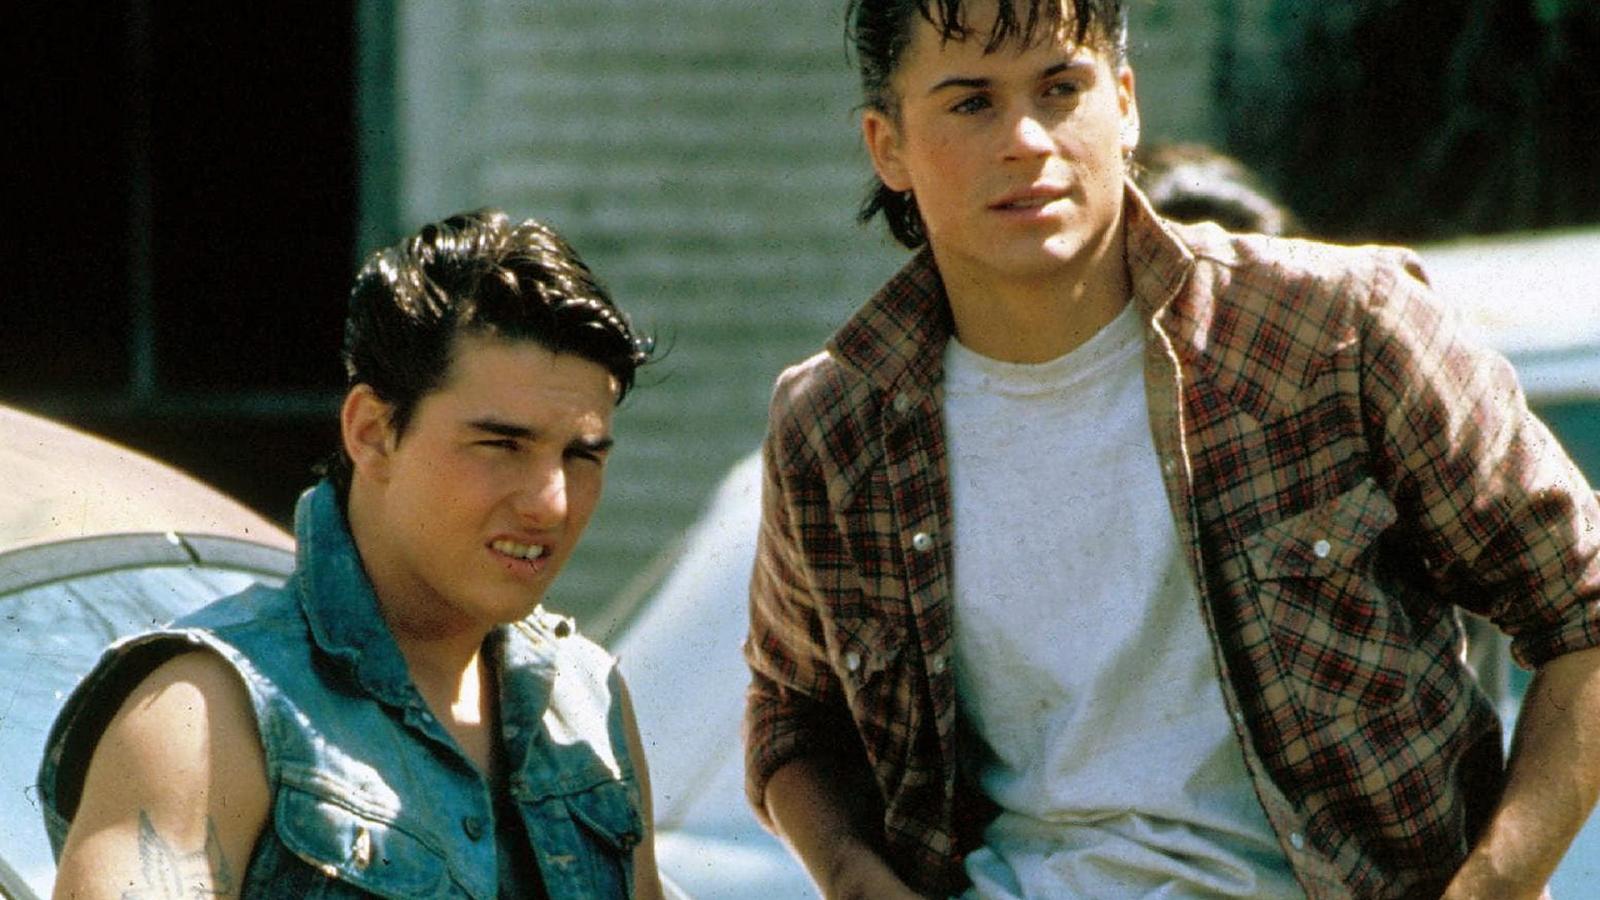 15 Coming-of-Age Movies that Defined the 80s - image 12